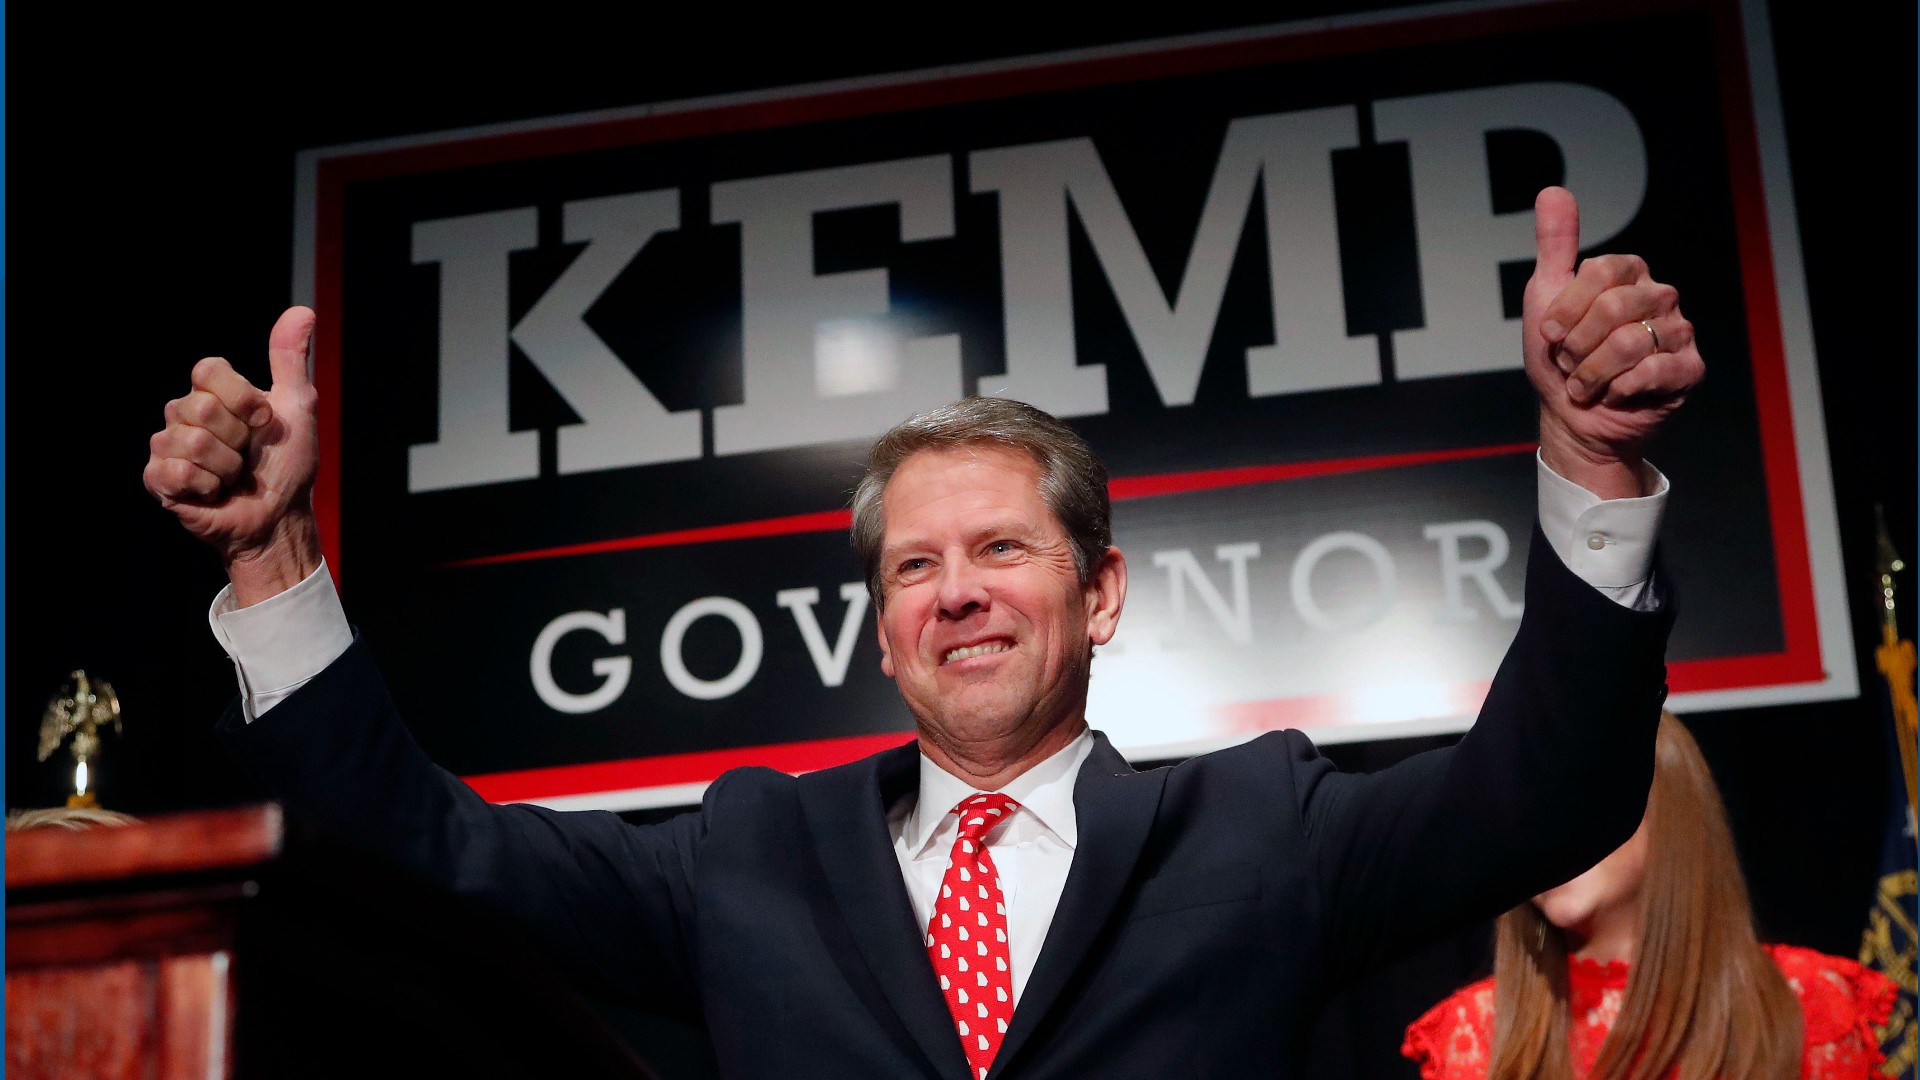 Gov. Kemp echoed the upcoming holiday and shopping season as a primary reason for the extension.